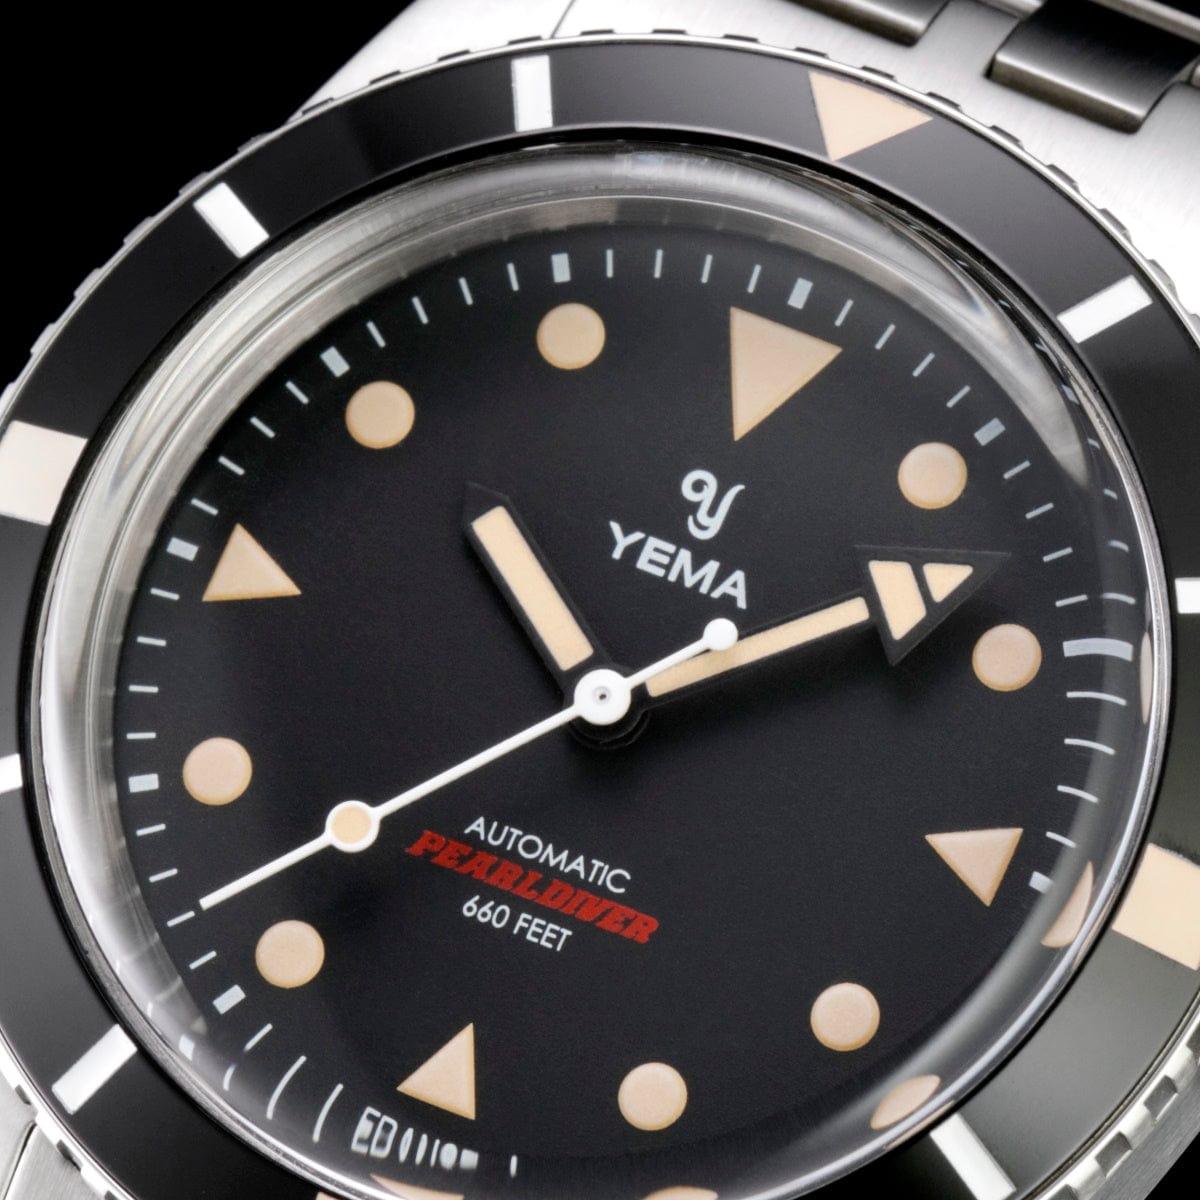 Yema Pearldiver Automatic Divers Watch - Black Dial - 38mm Dial Macro